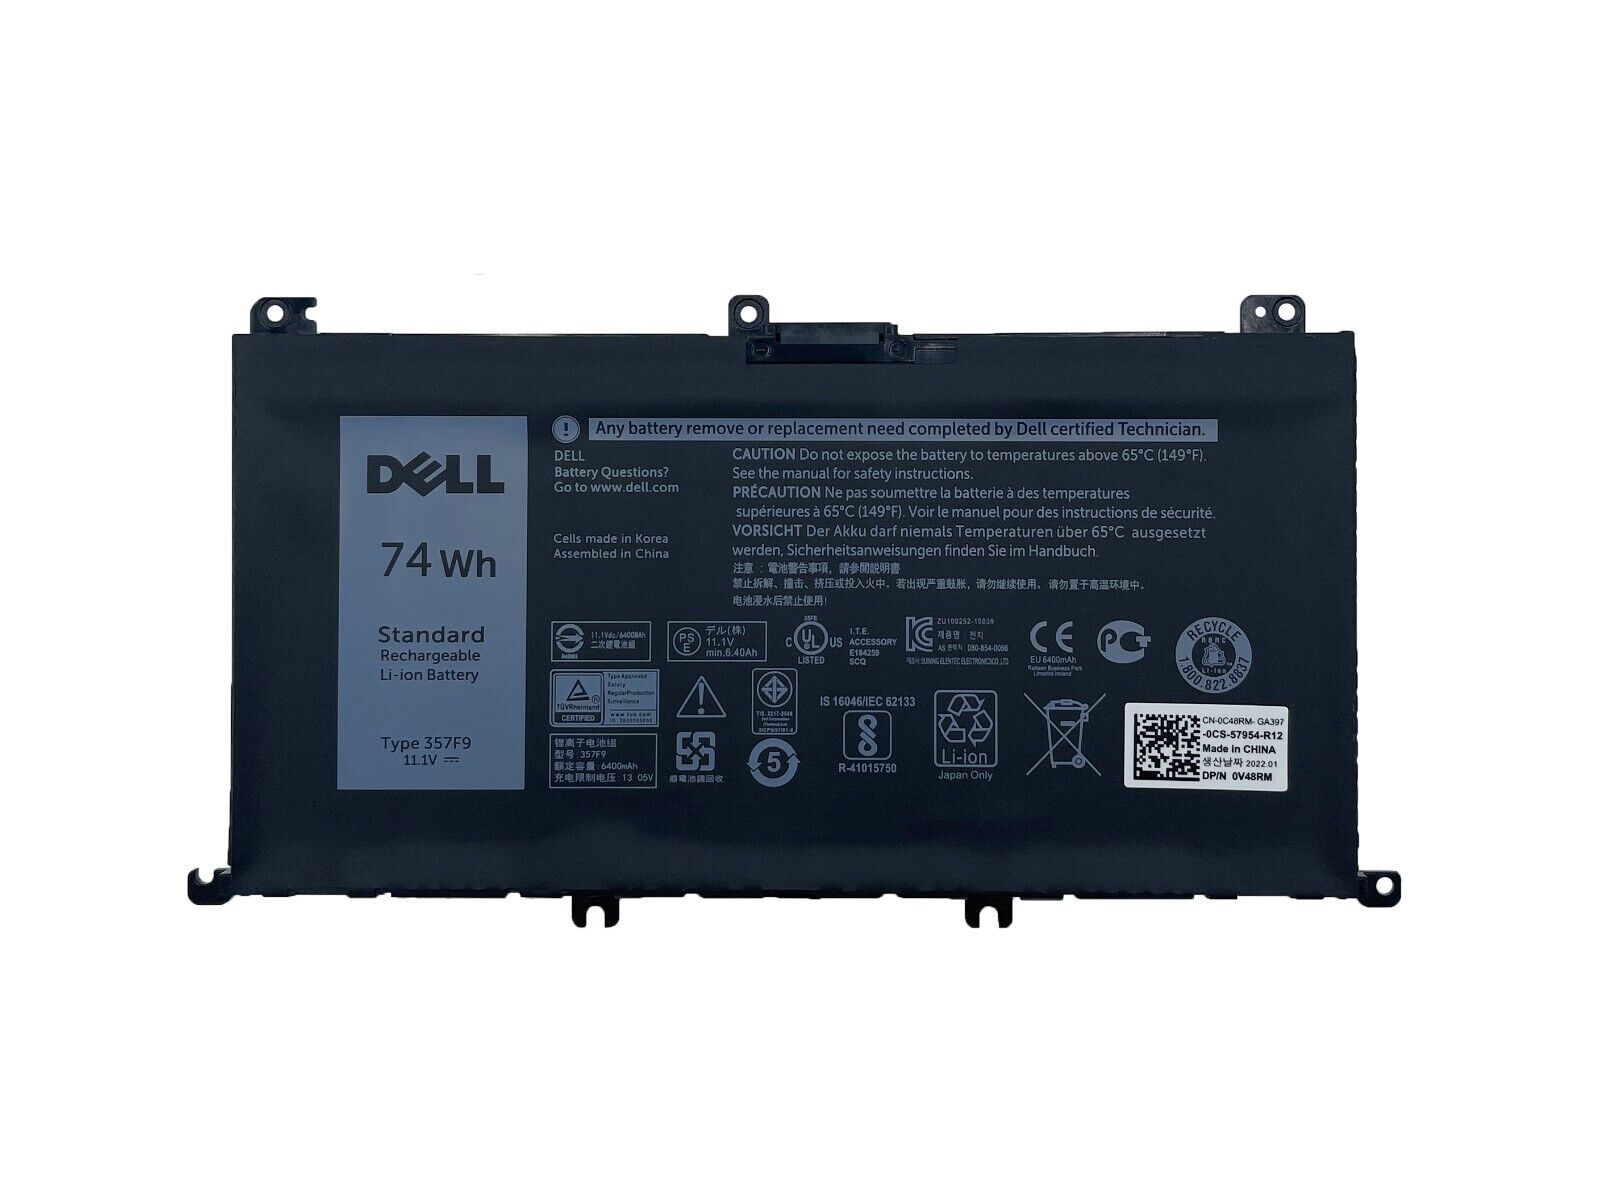 NEW OEM 74WH 357F9 71JF4 Battery For Dell Inspiron 5576 5577 7559 7557 7567 7566